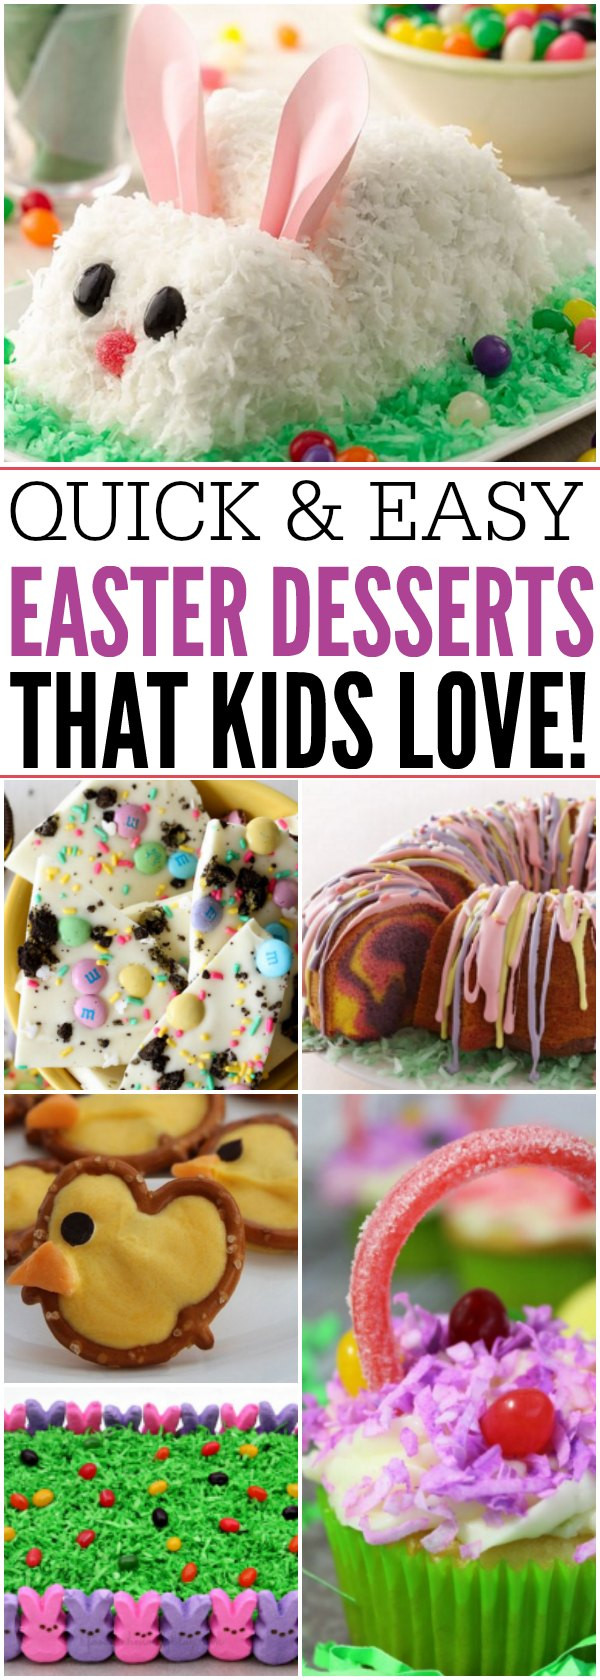 Kid Friendly Easter Desserts
 16 Quick and Easy Easter Dessert Recipes That Everyone